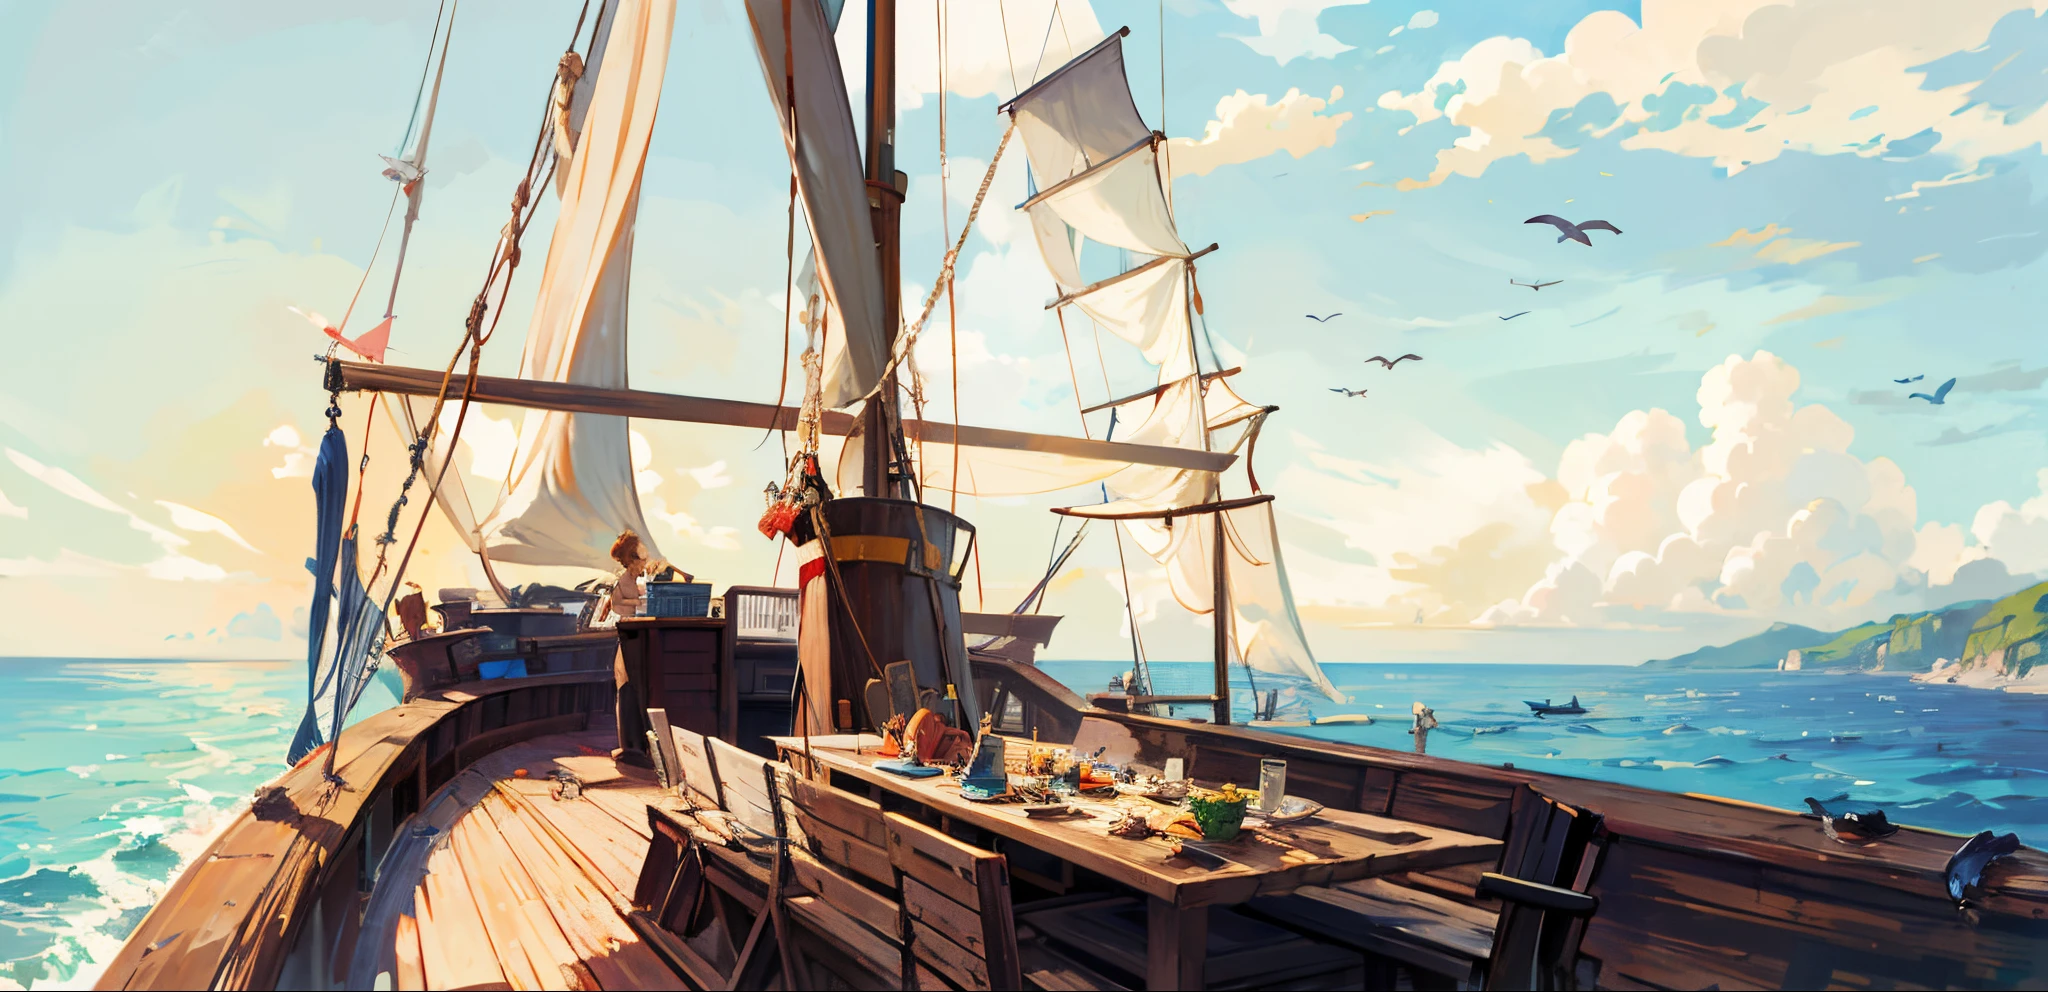 pirate ships, Local, the detail, day, Scavenging, at noon, ((and the sun was shining brightly)), at noon, bow detail, Boat,vessels, the ocean, Boat, cloud, ((blue-sky)), Boat, scenecy, Outdoor sports, That bird, Eau, horizon, without humans,  swell sea, suns